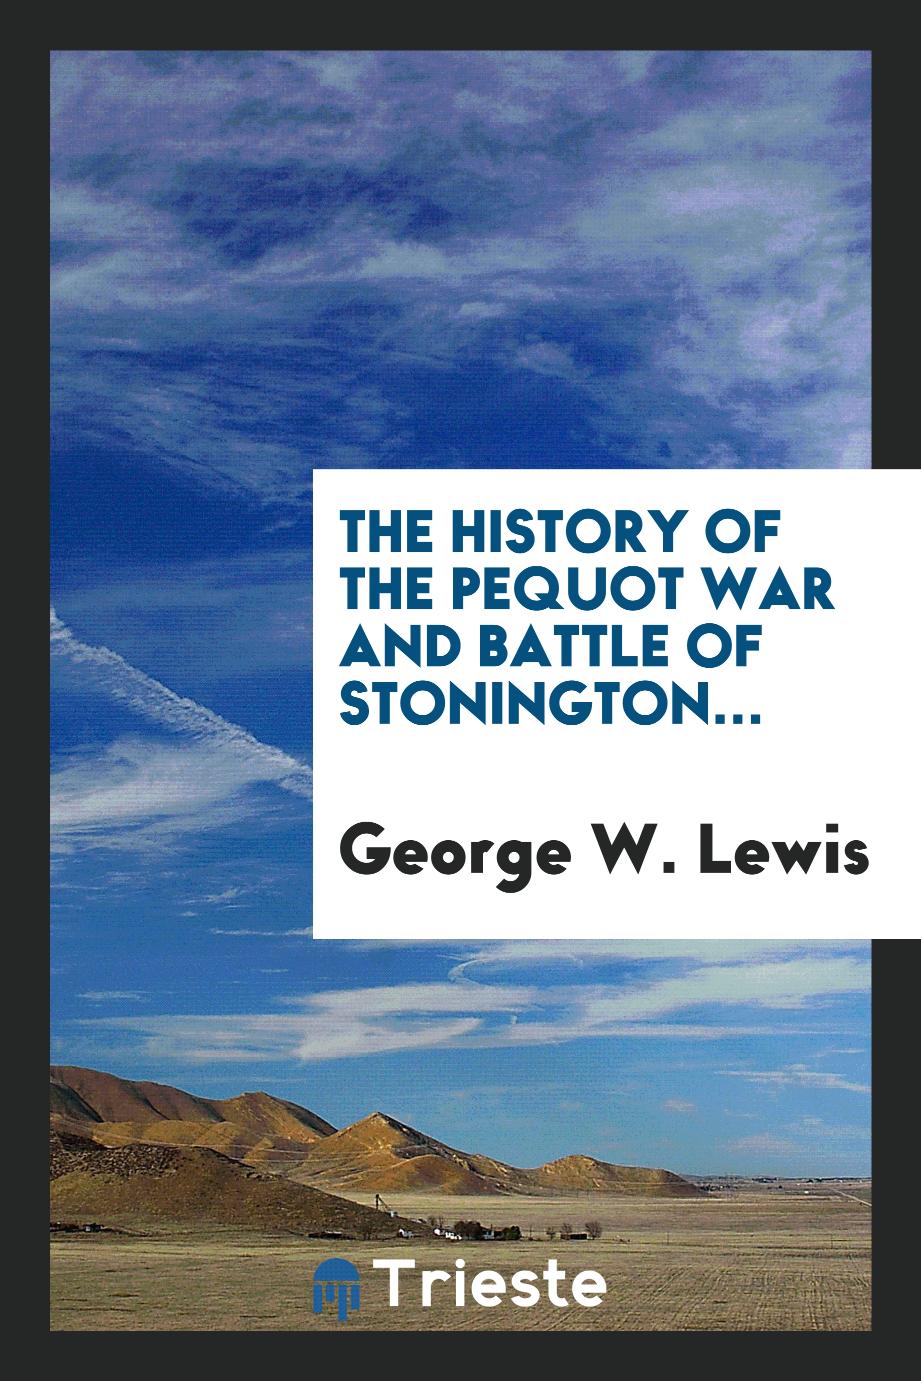 The History of the Pequot War and Battle of Stonington...